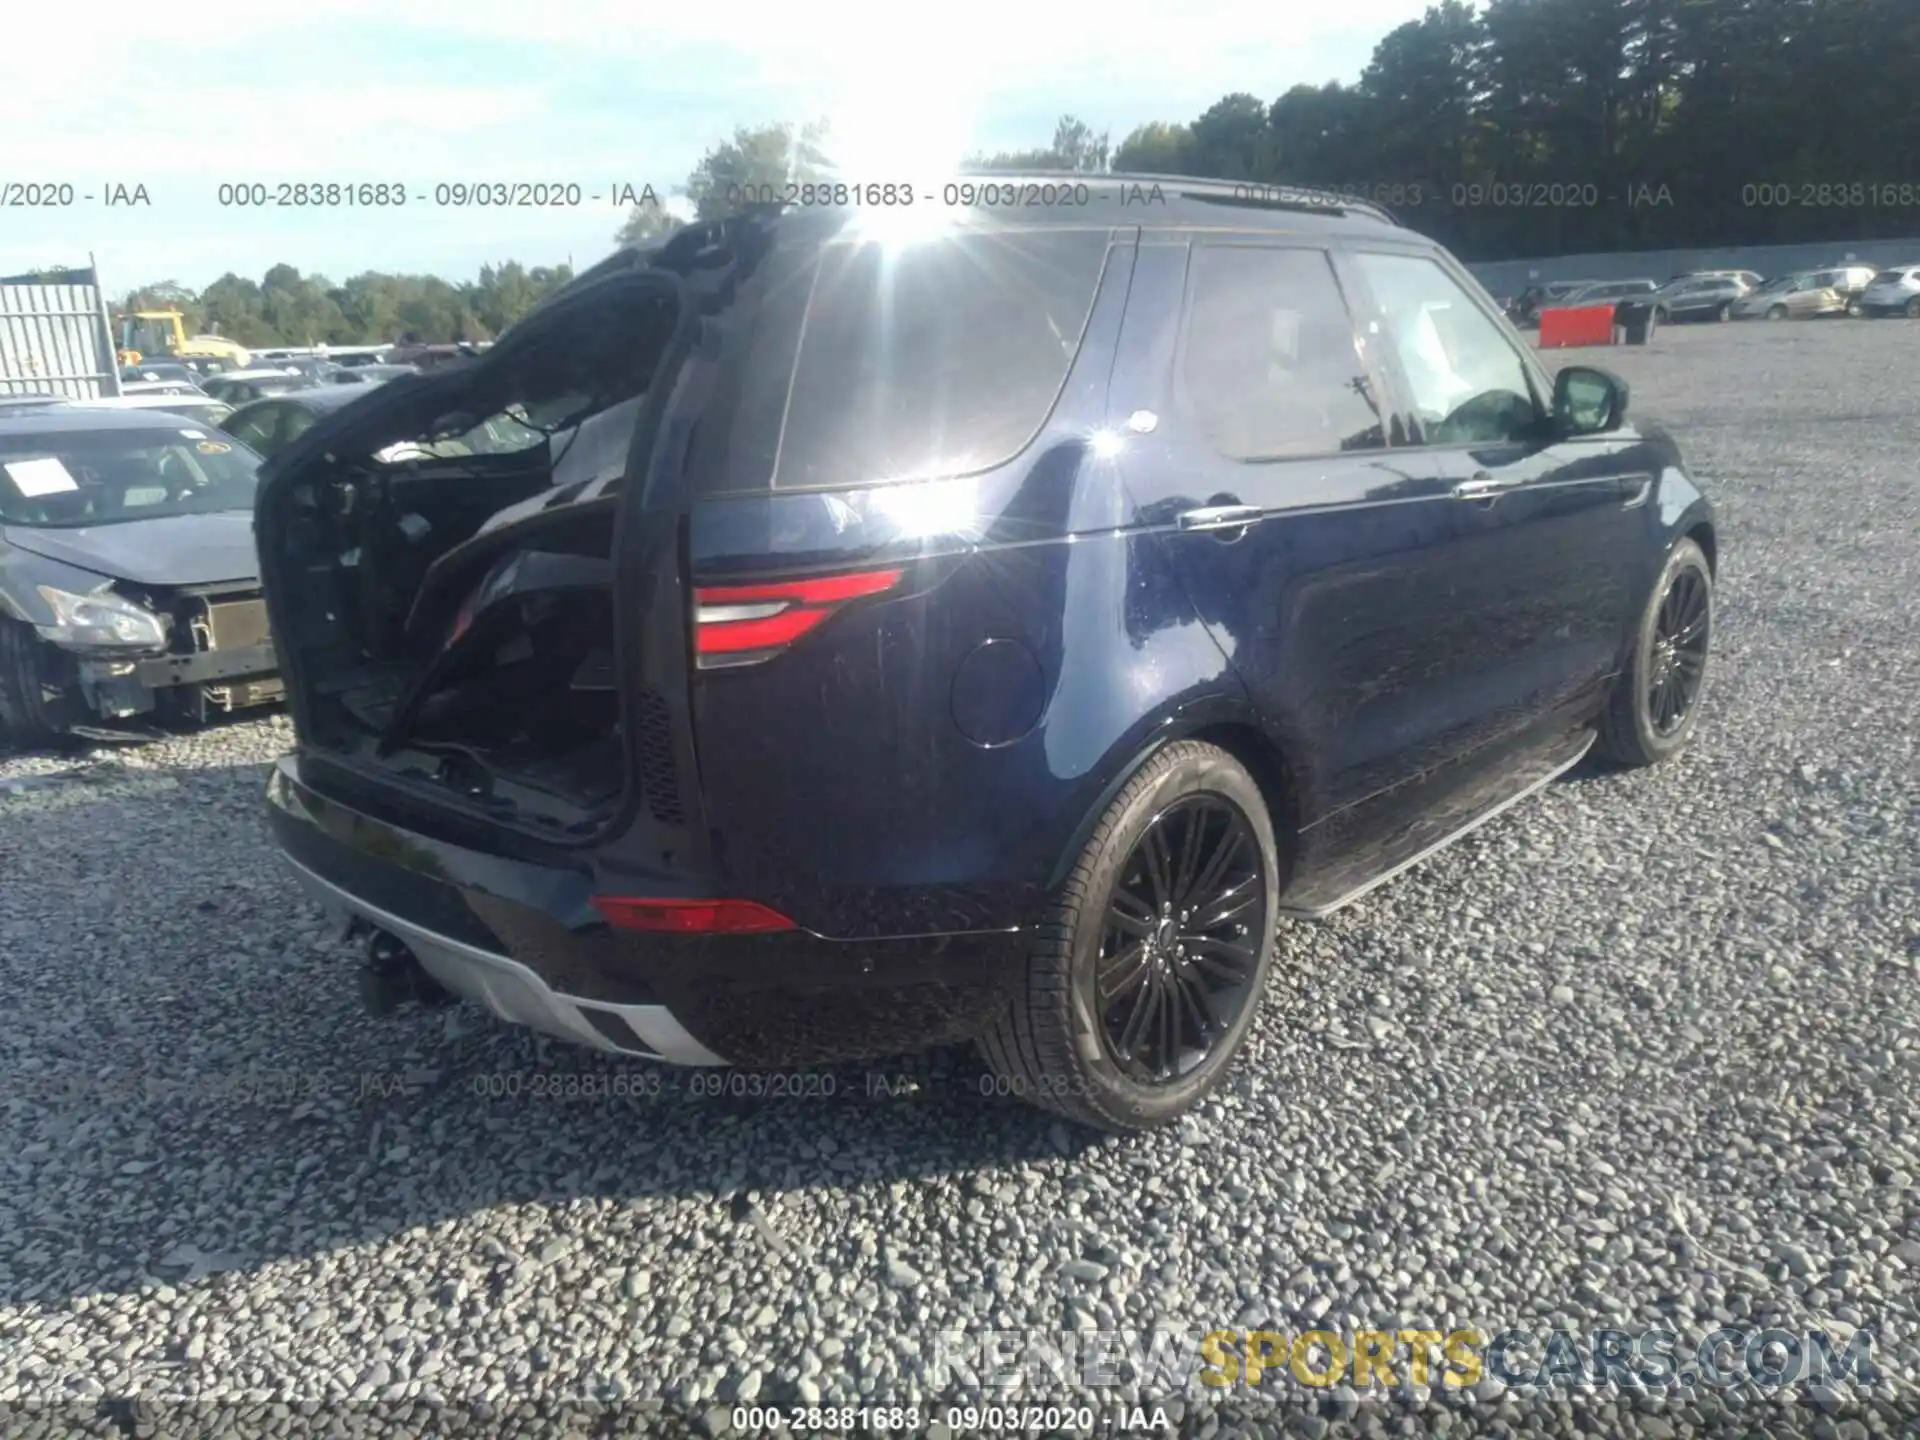 4 Photograph of a damaged car SALRT2RV0L2432176 LAND ROVER DISCOVERY 2020